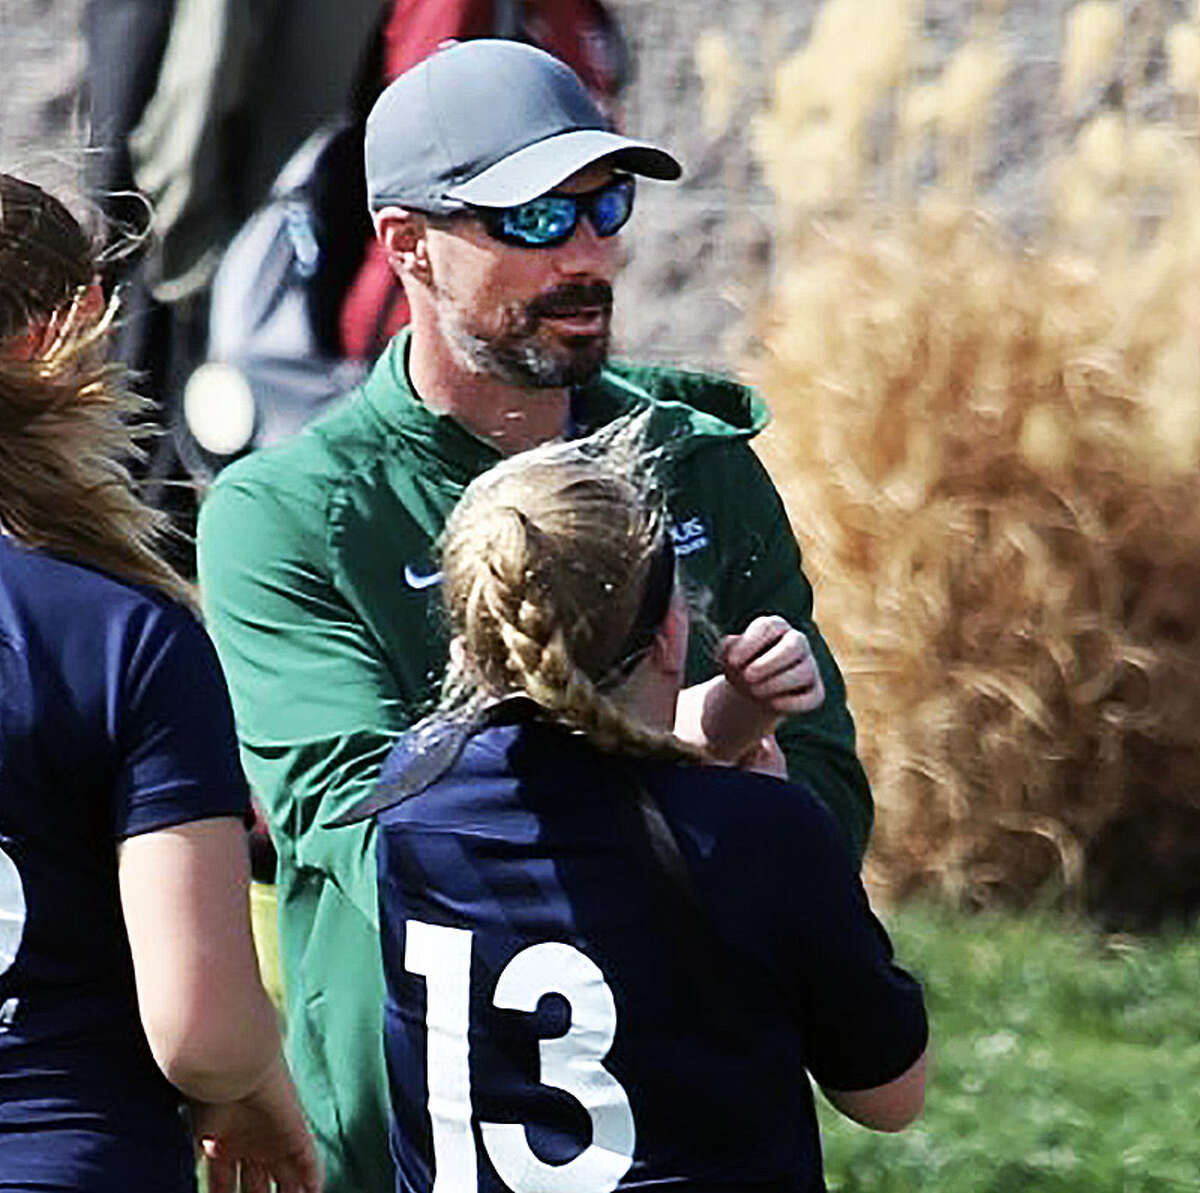 Justin Bernaix, shown coaching a St. Louis Scott Gallagher team, is the new interim women's soccer coach at LCCC. Bernaix is also an assistant professor of English at LCCC, a former SIUE player and a graduate of Granite City High School.